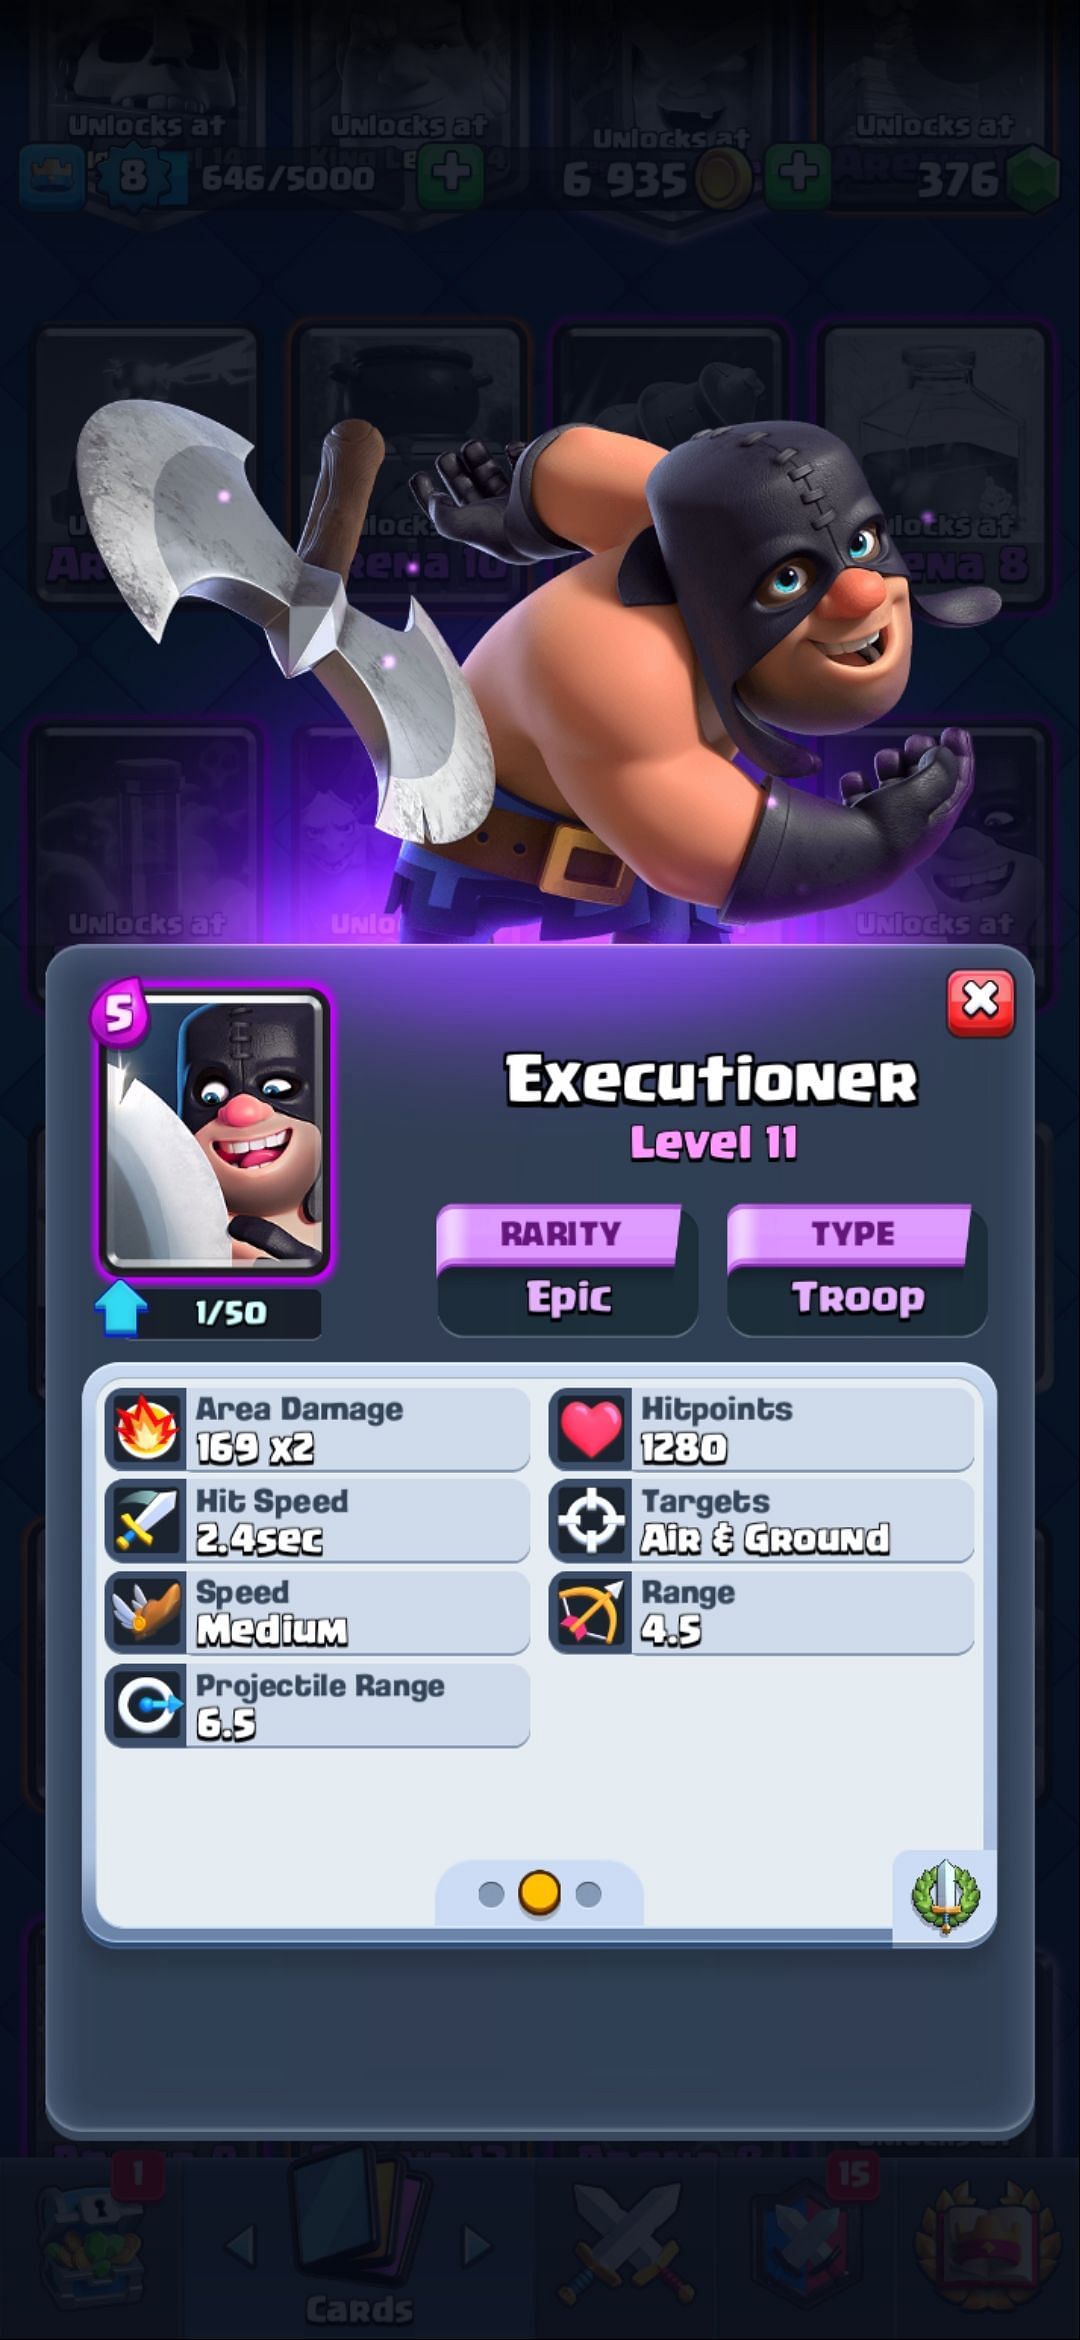 The Executioner card (Image via Clash of Clans)